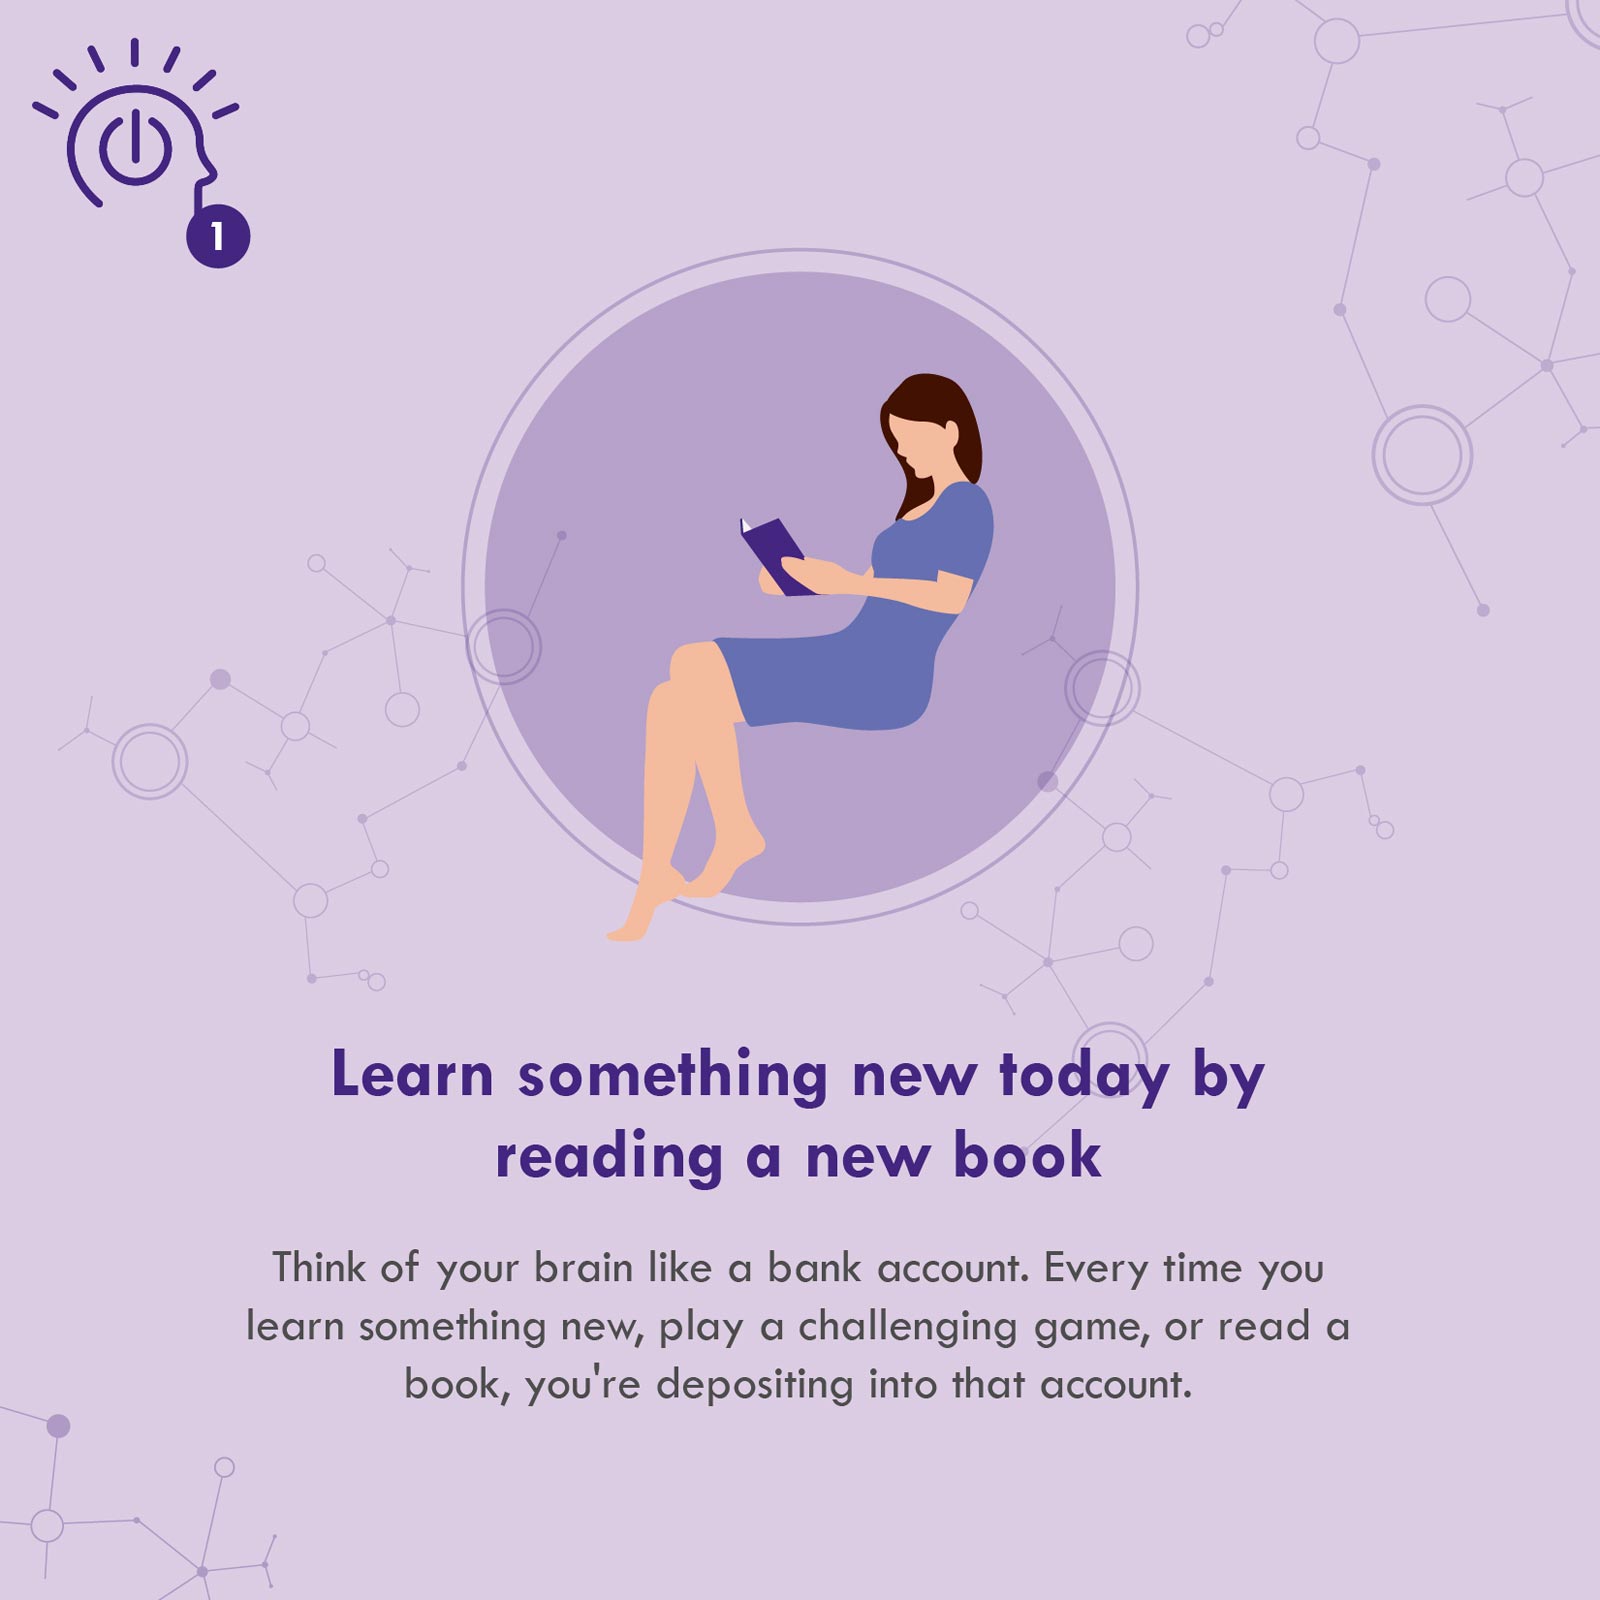 Natrol “Learn something new today by reading a new book”